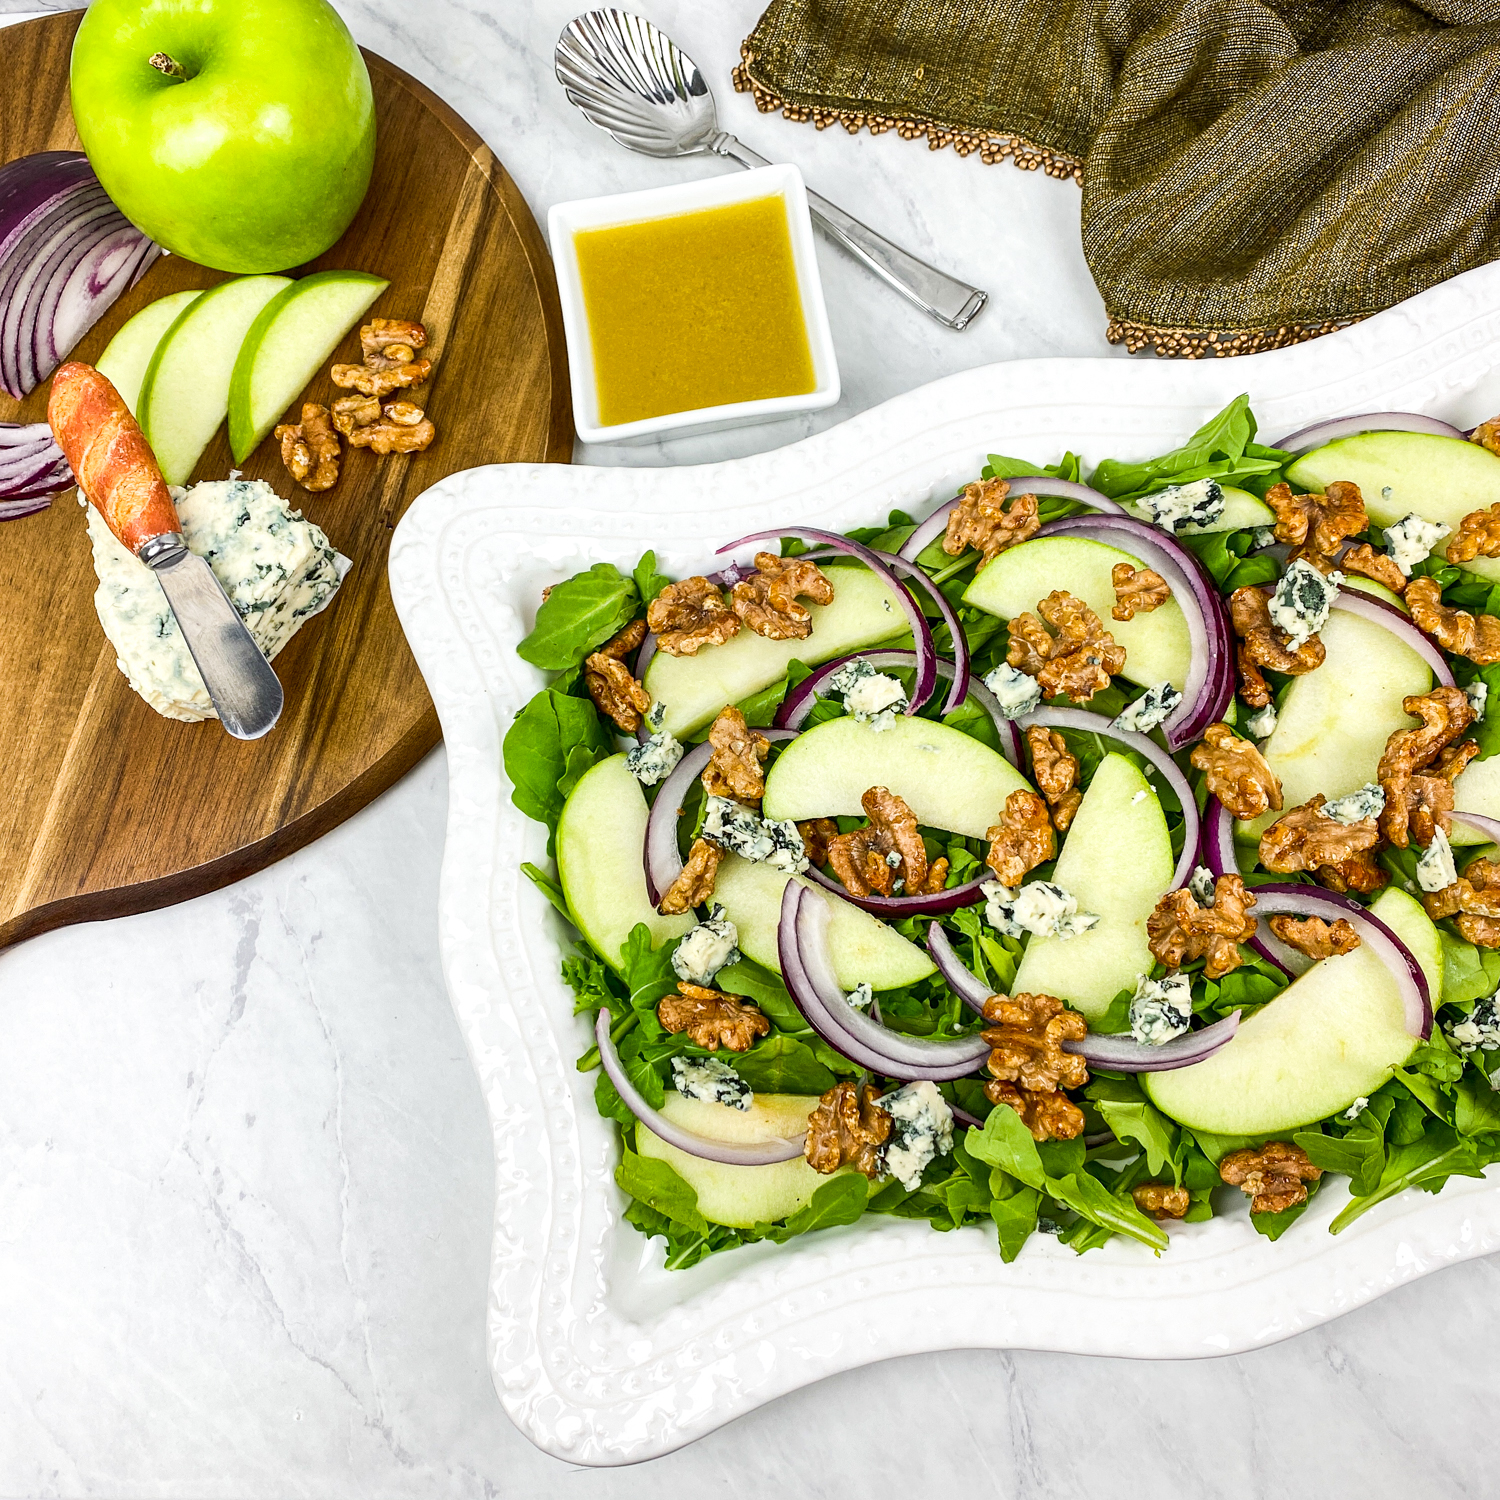 Plated apple walnut salad with dressing